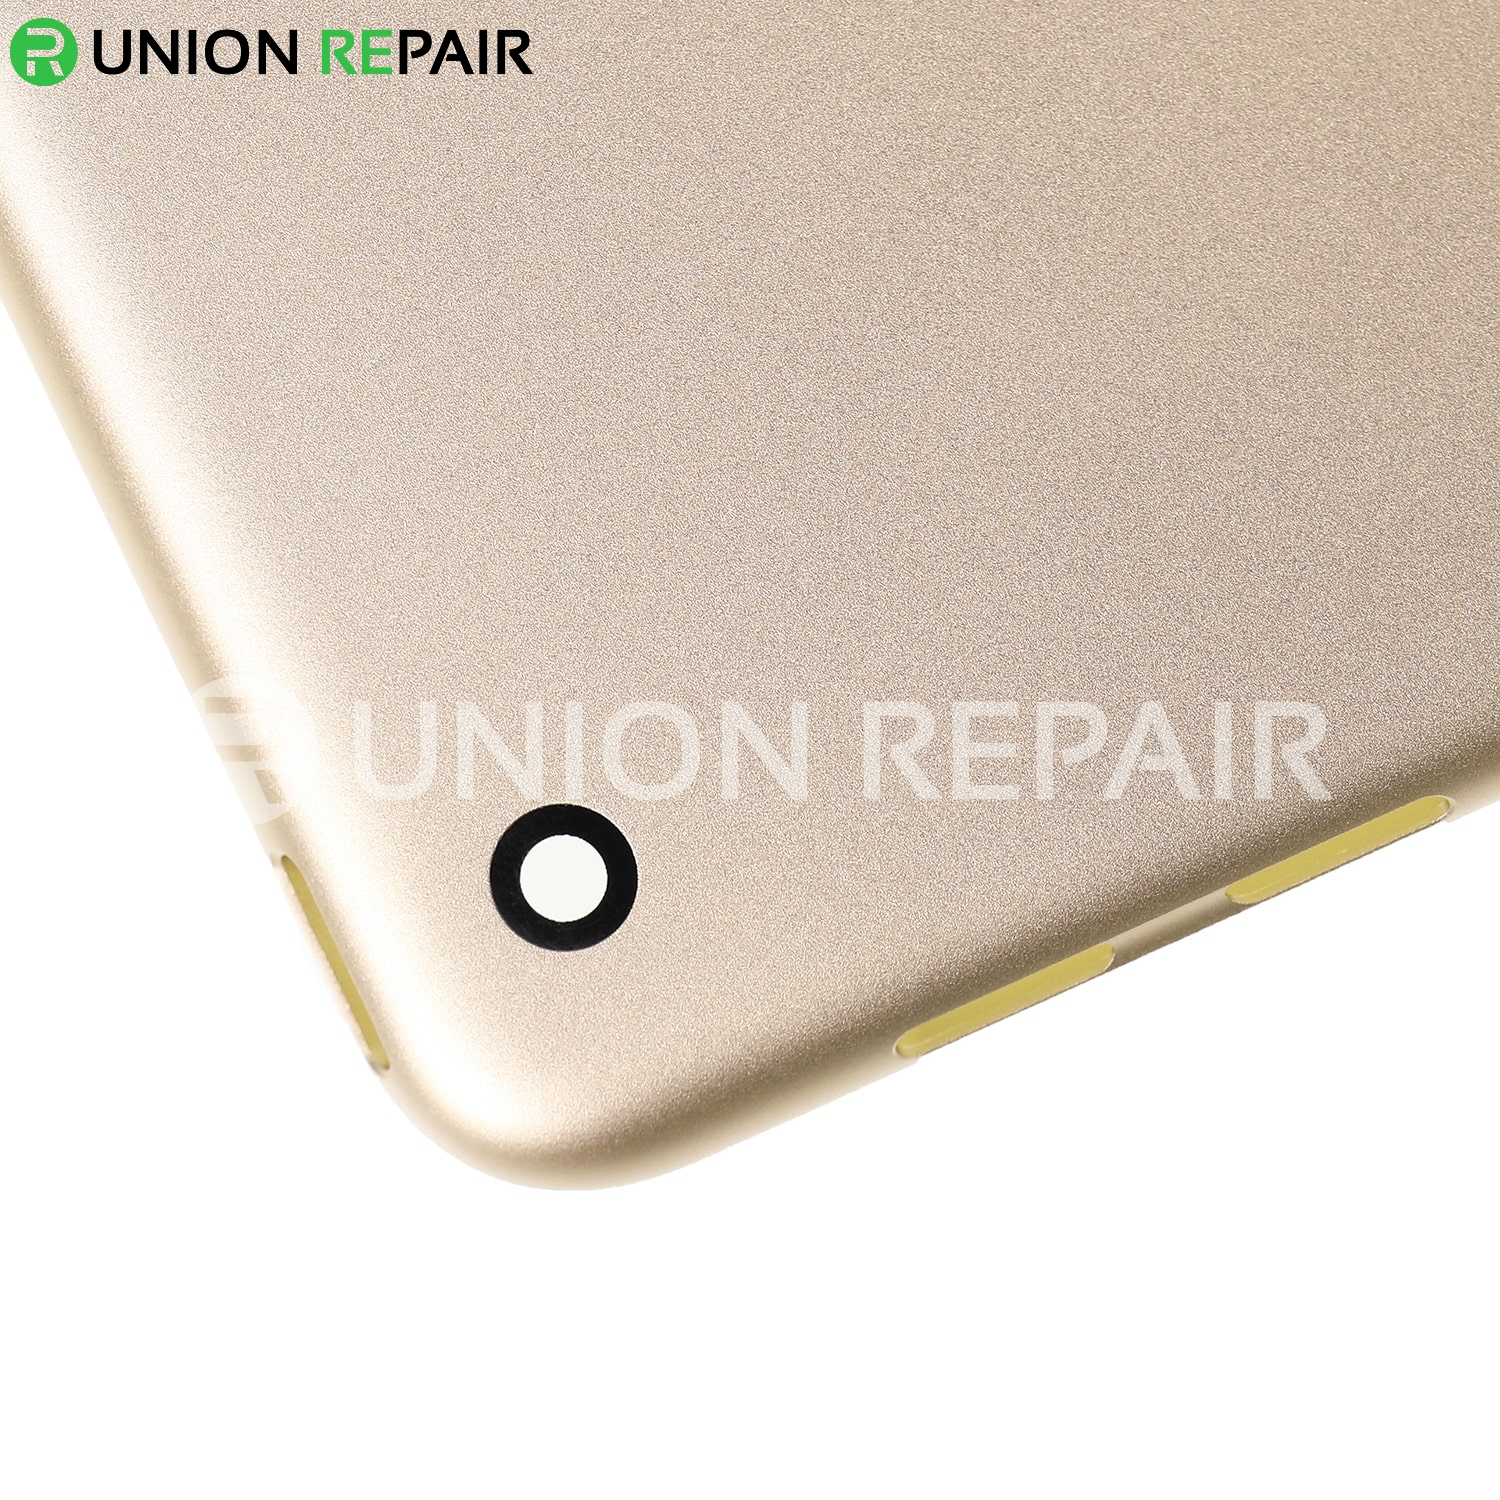 Replacement for iPad 6 WiFi Version Back Cover - Gold